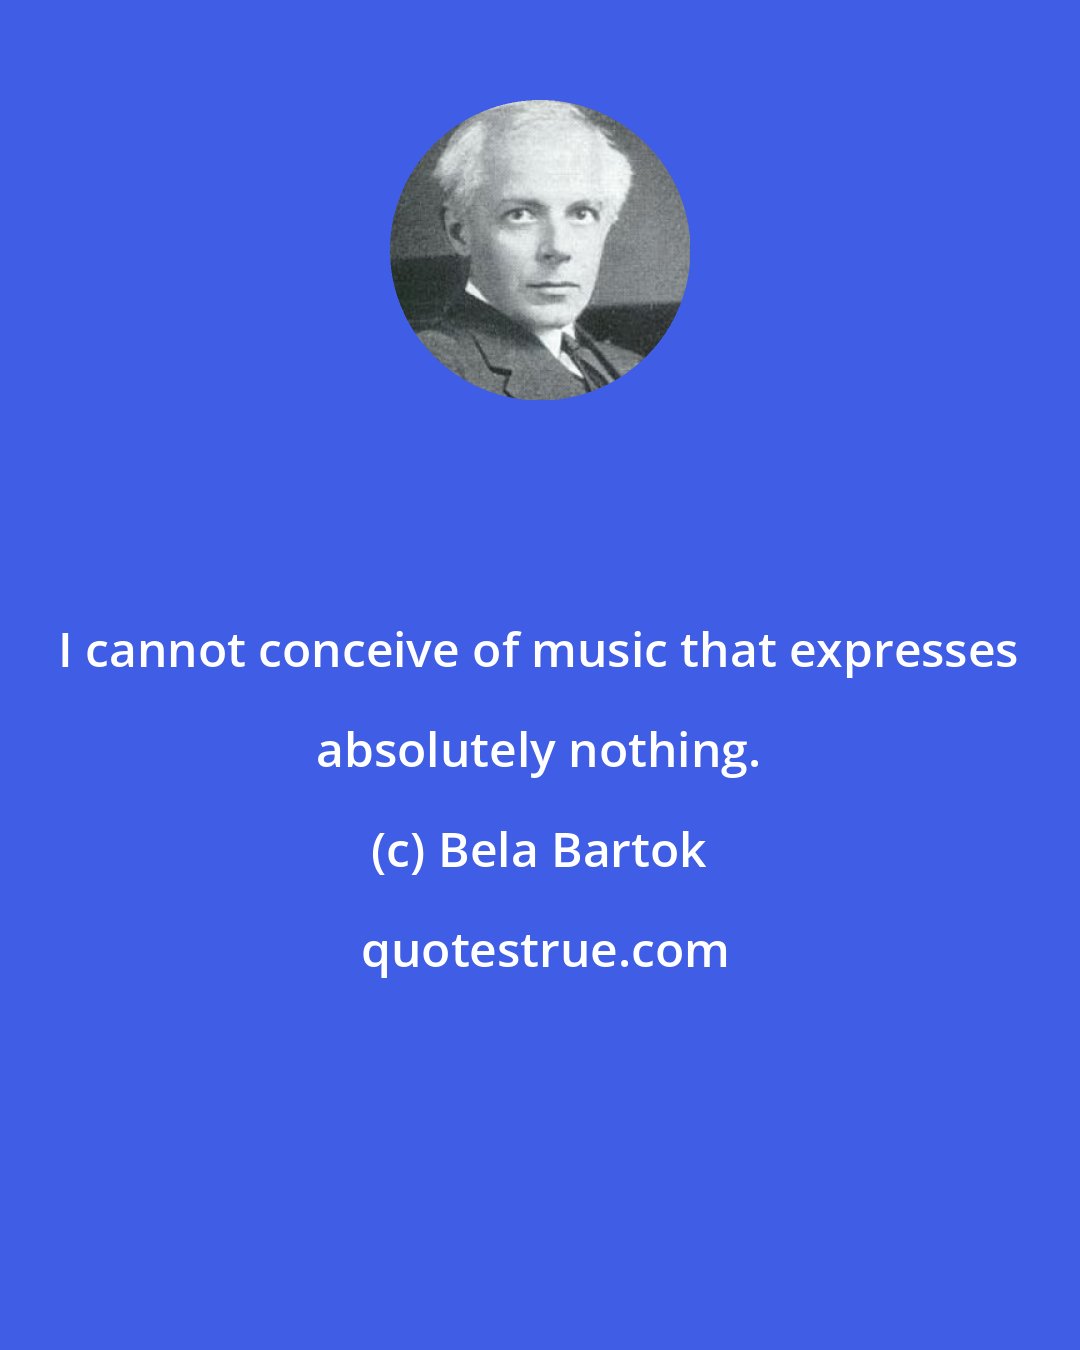 Bela Bartok: I cannot conceive of music that expresses absolutely nothing.